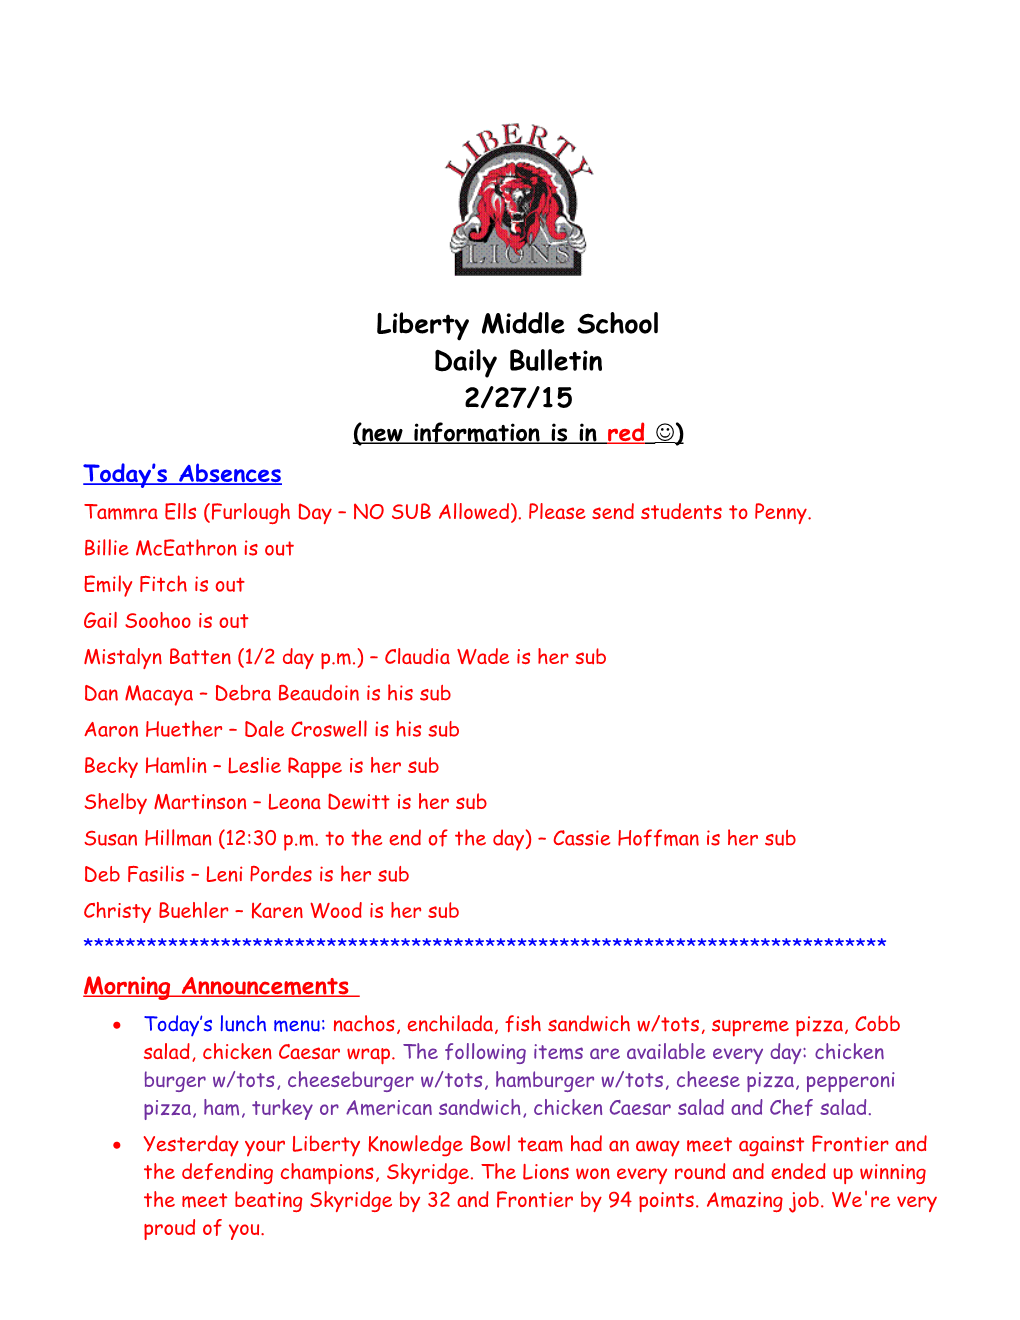 Liberty Middle School s2